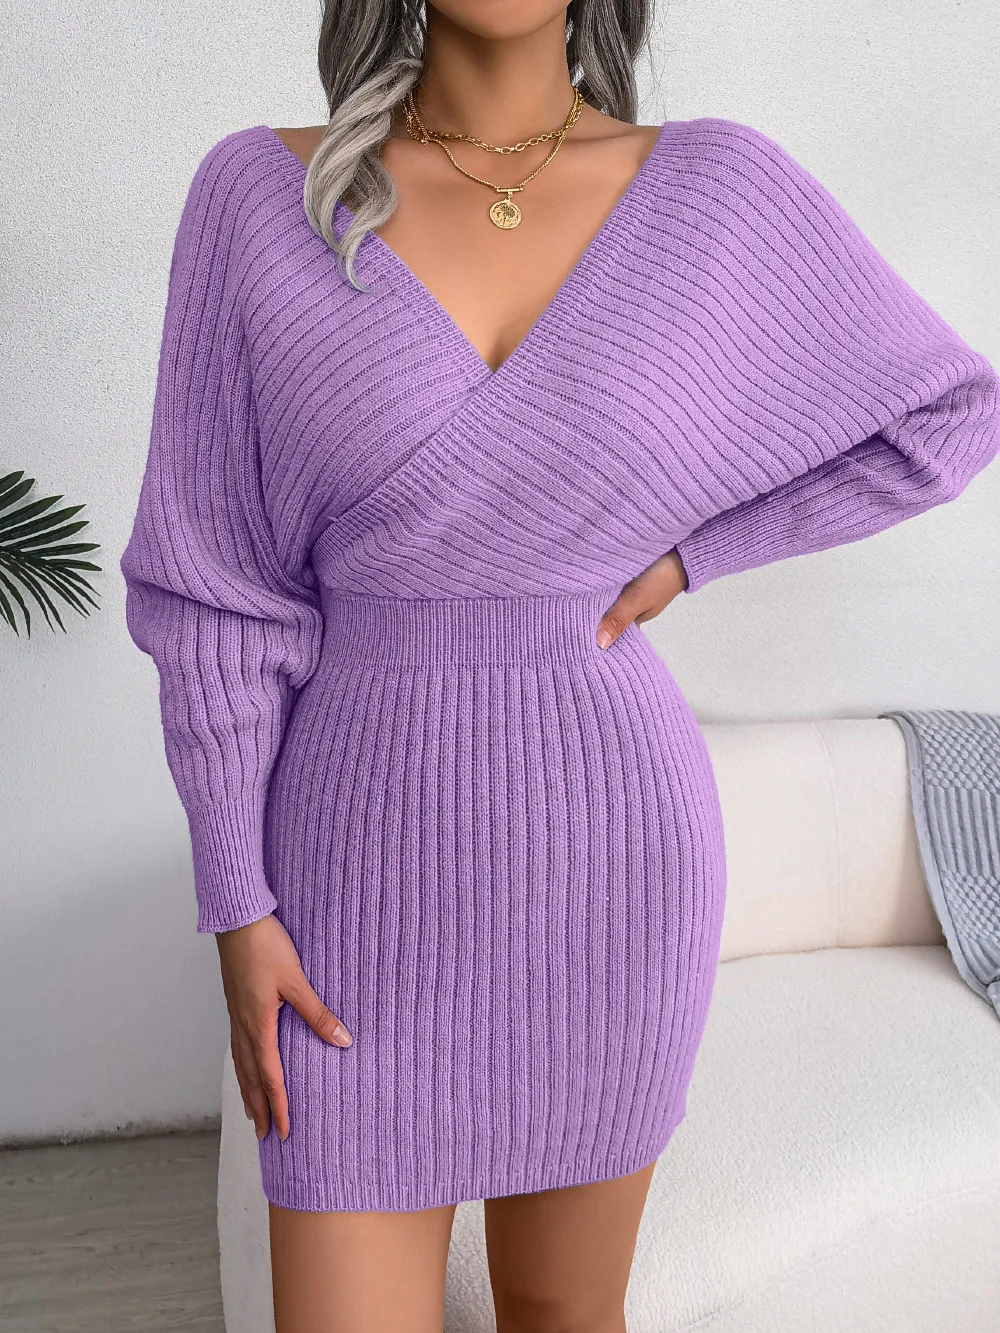 New Quality Wholesale Women Clothing Sweater Dress V-neck Knitted ...